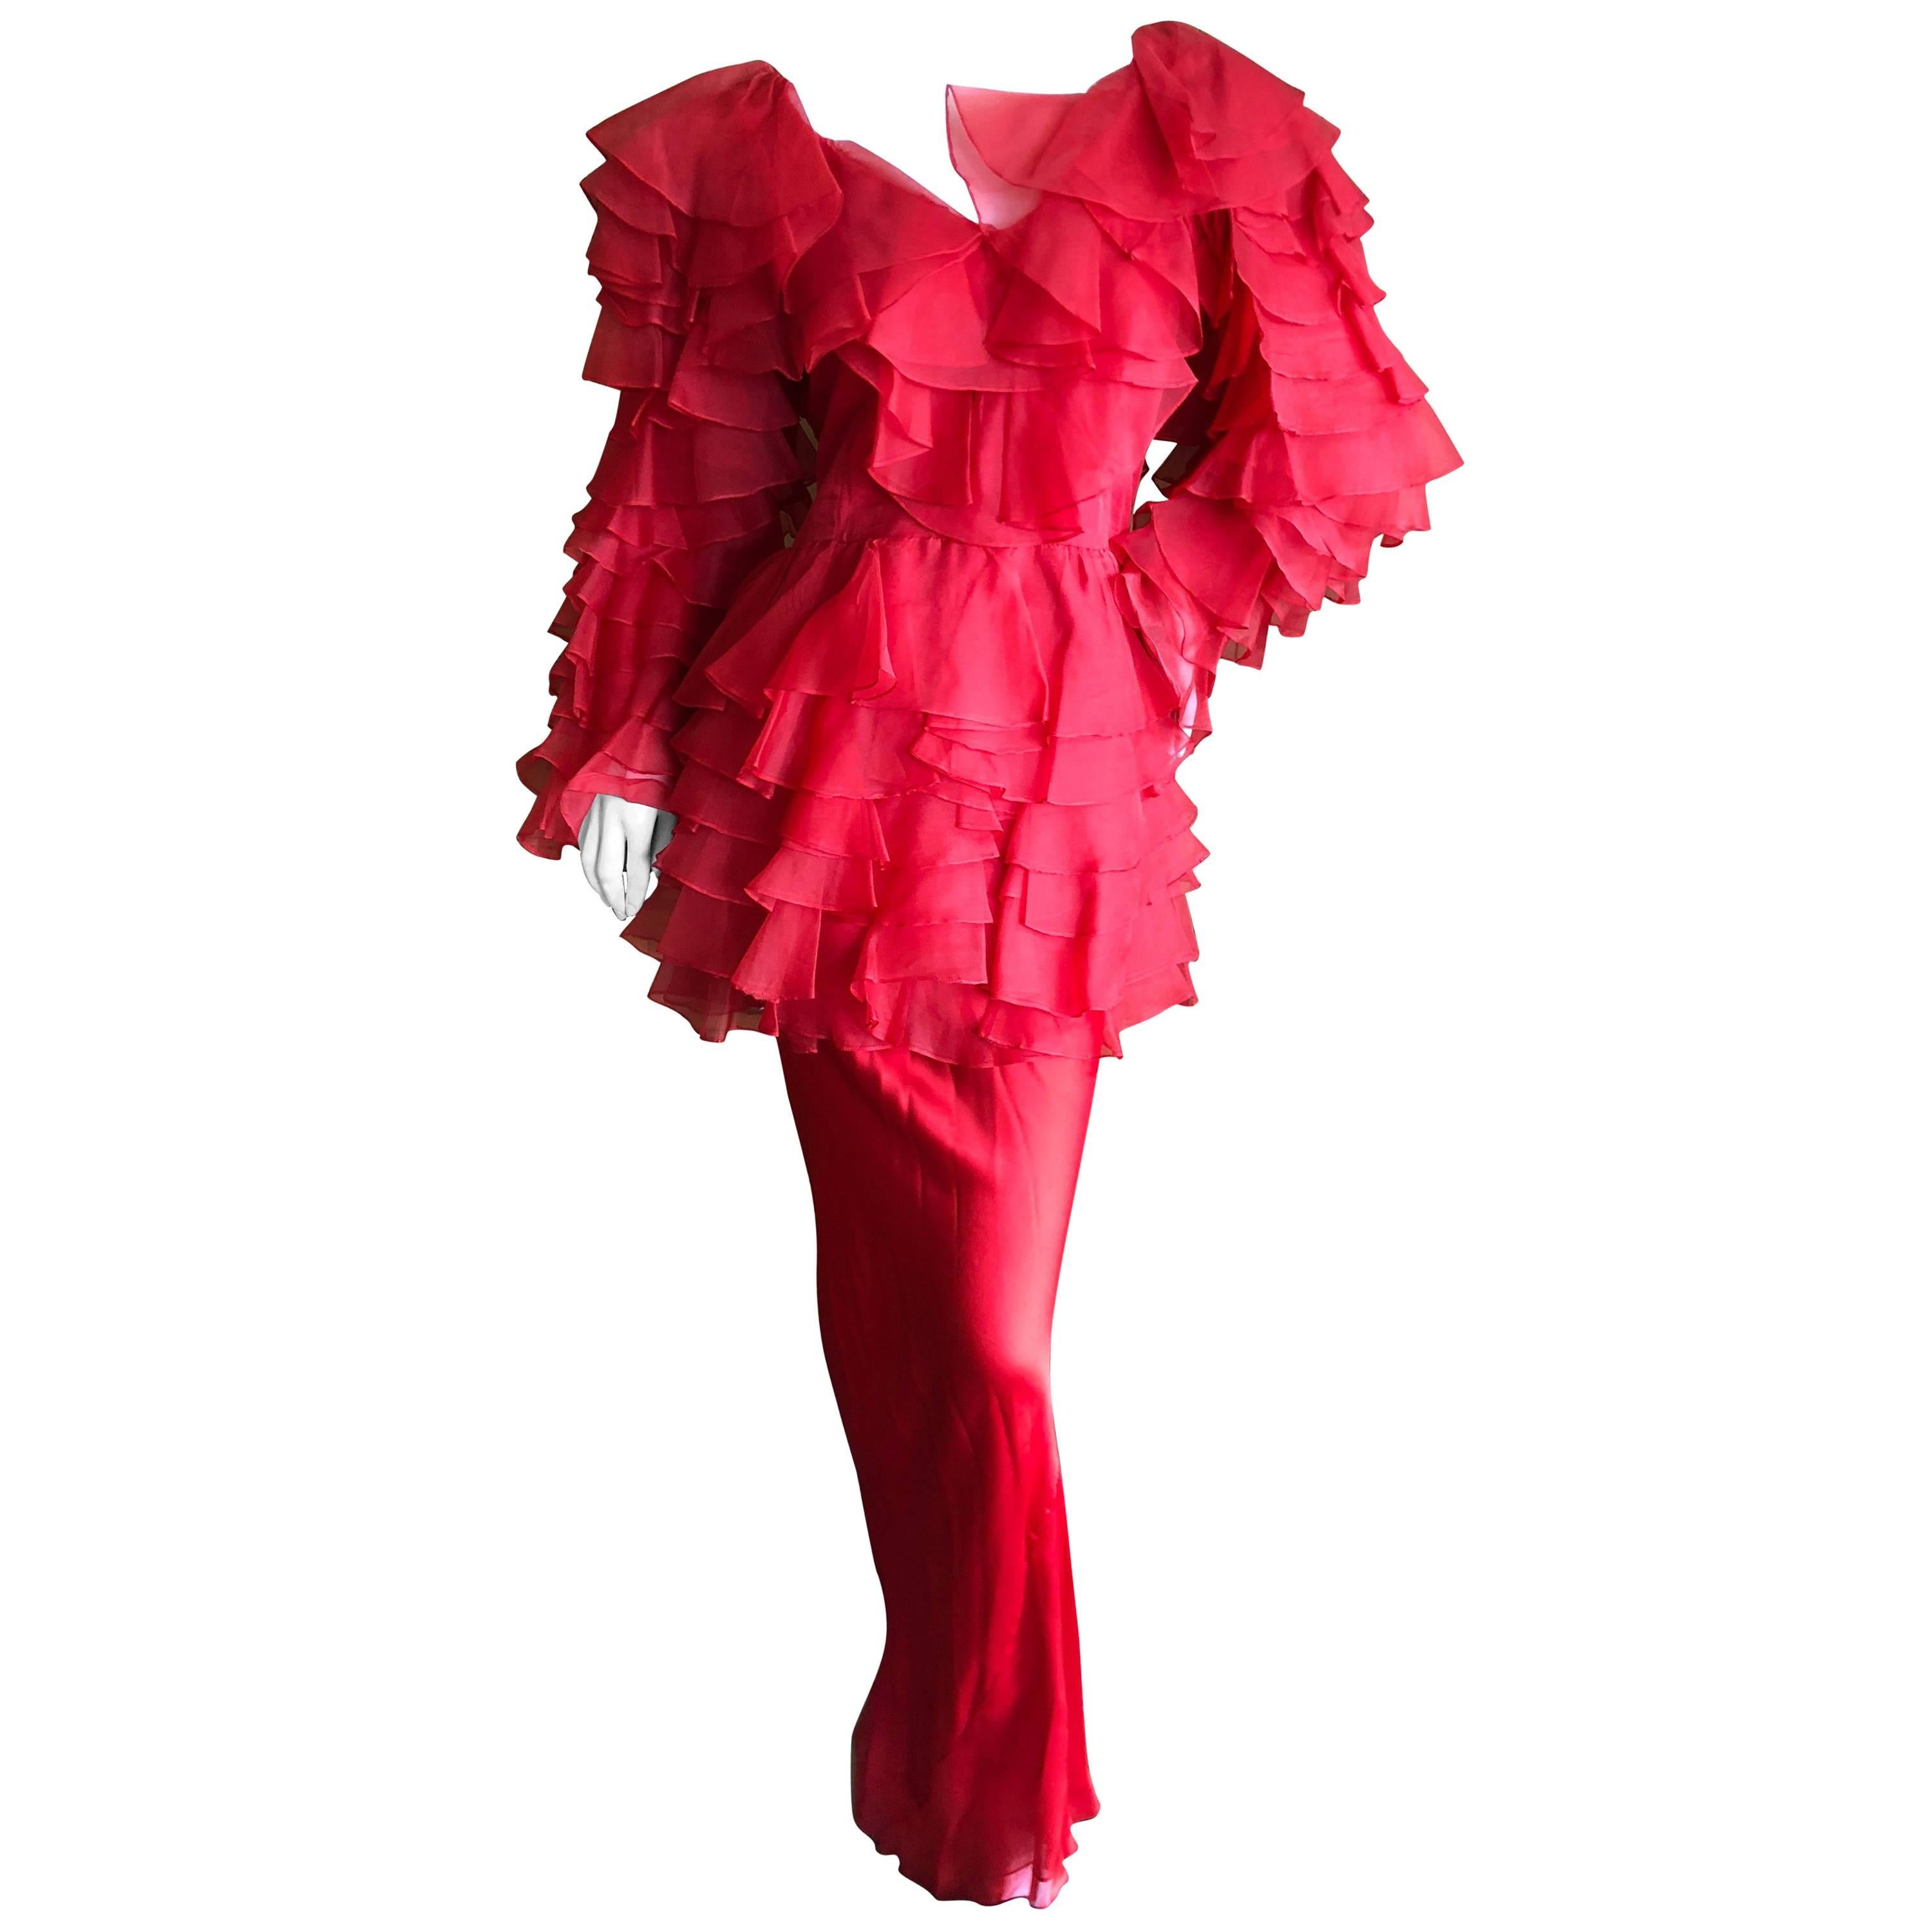 Cardinali 1970s Scarlet Red Ruffled Top and Bias Cut Silk Skirt with Fascinator For Sale